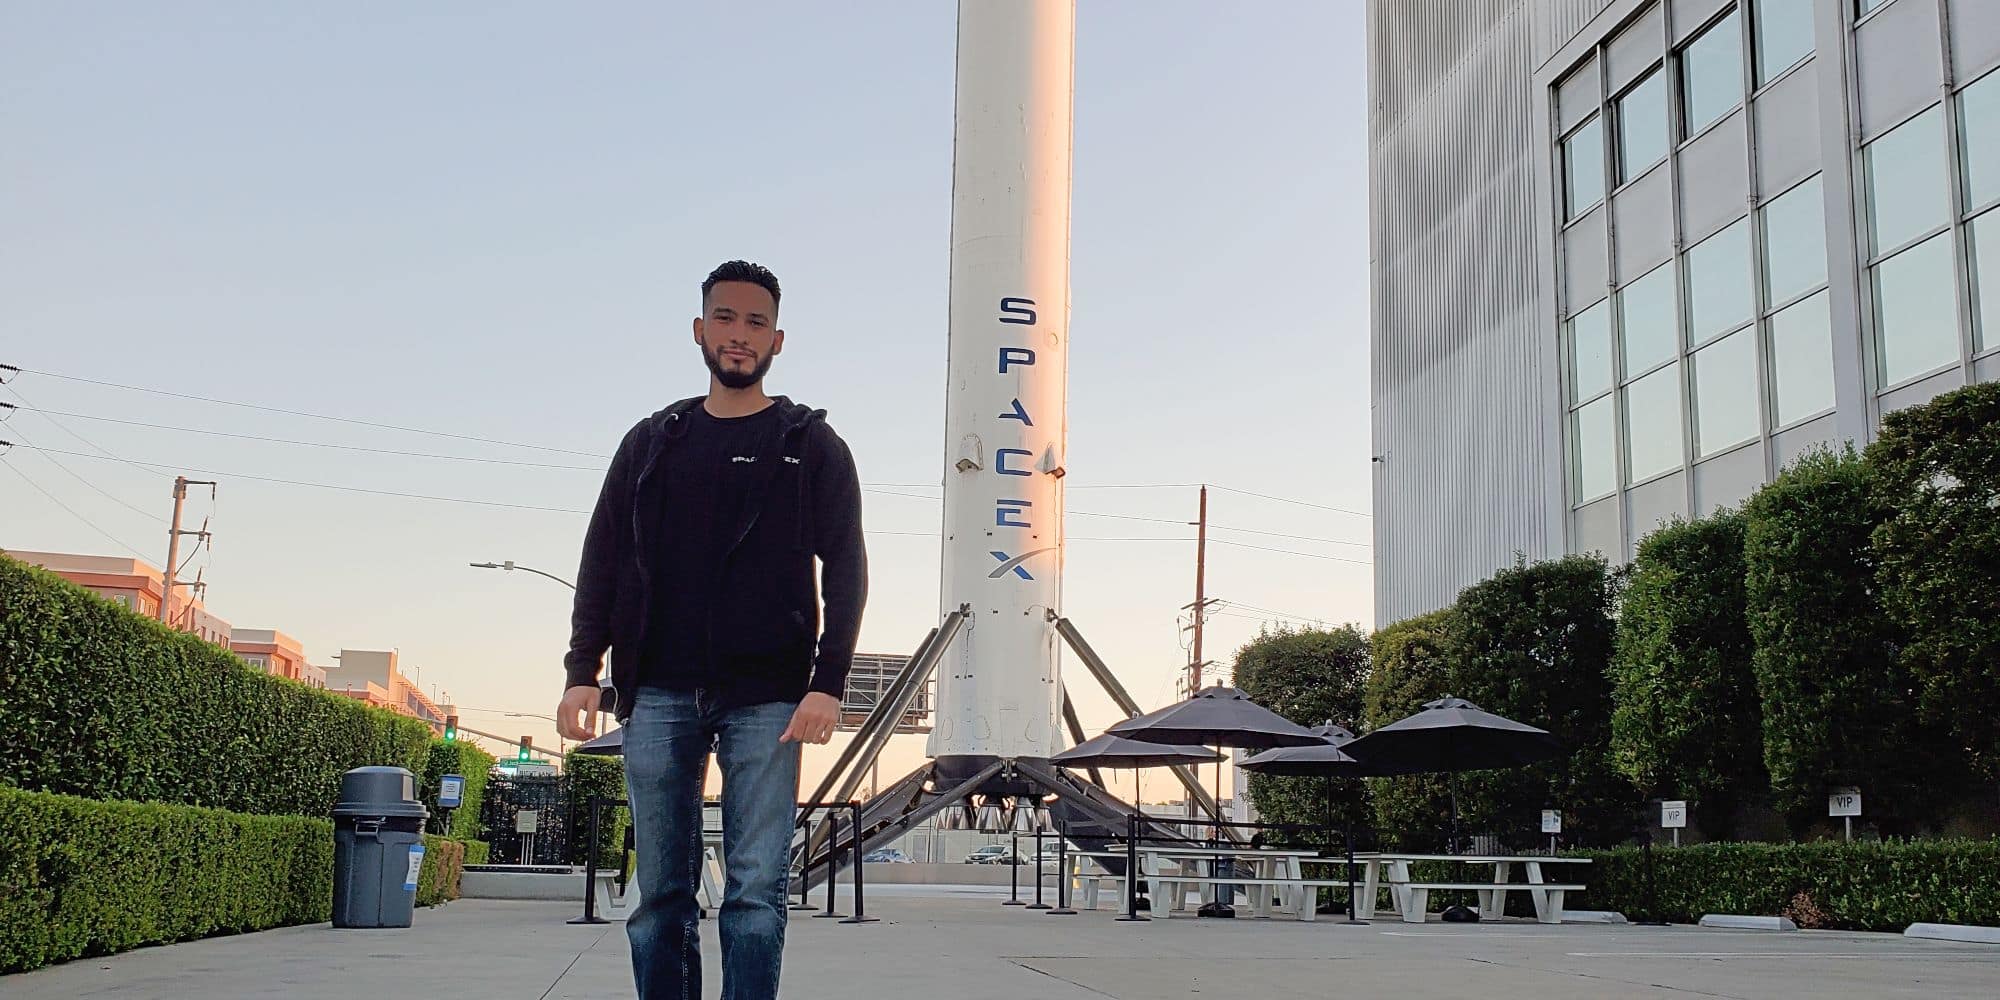 Bachelor of Engineering student Marcos Dominguez stands in front of a SpaceX booster.